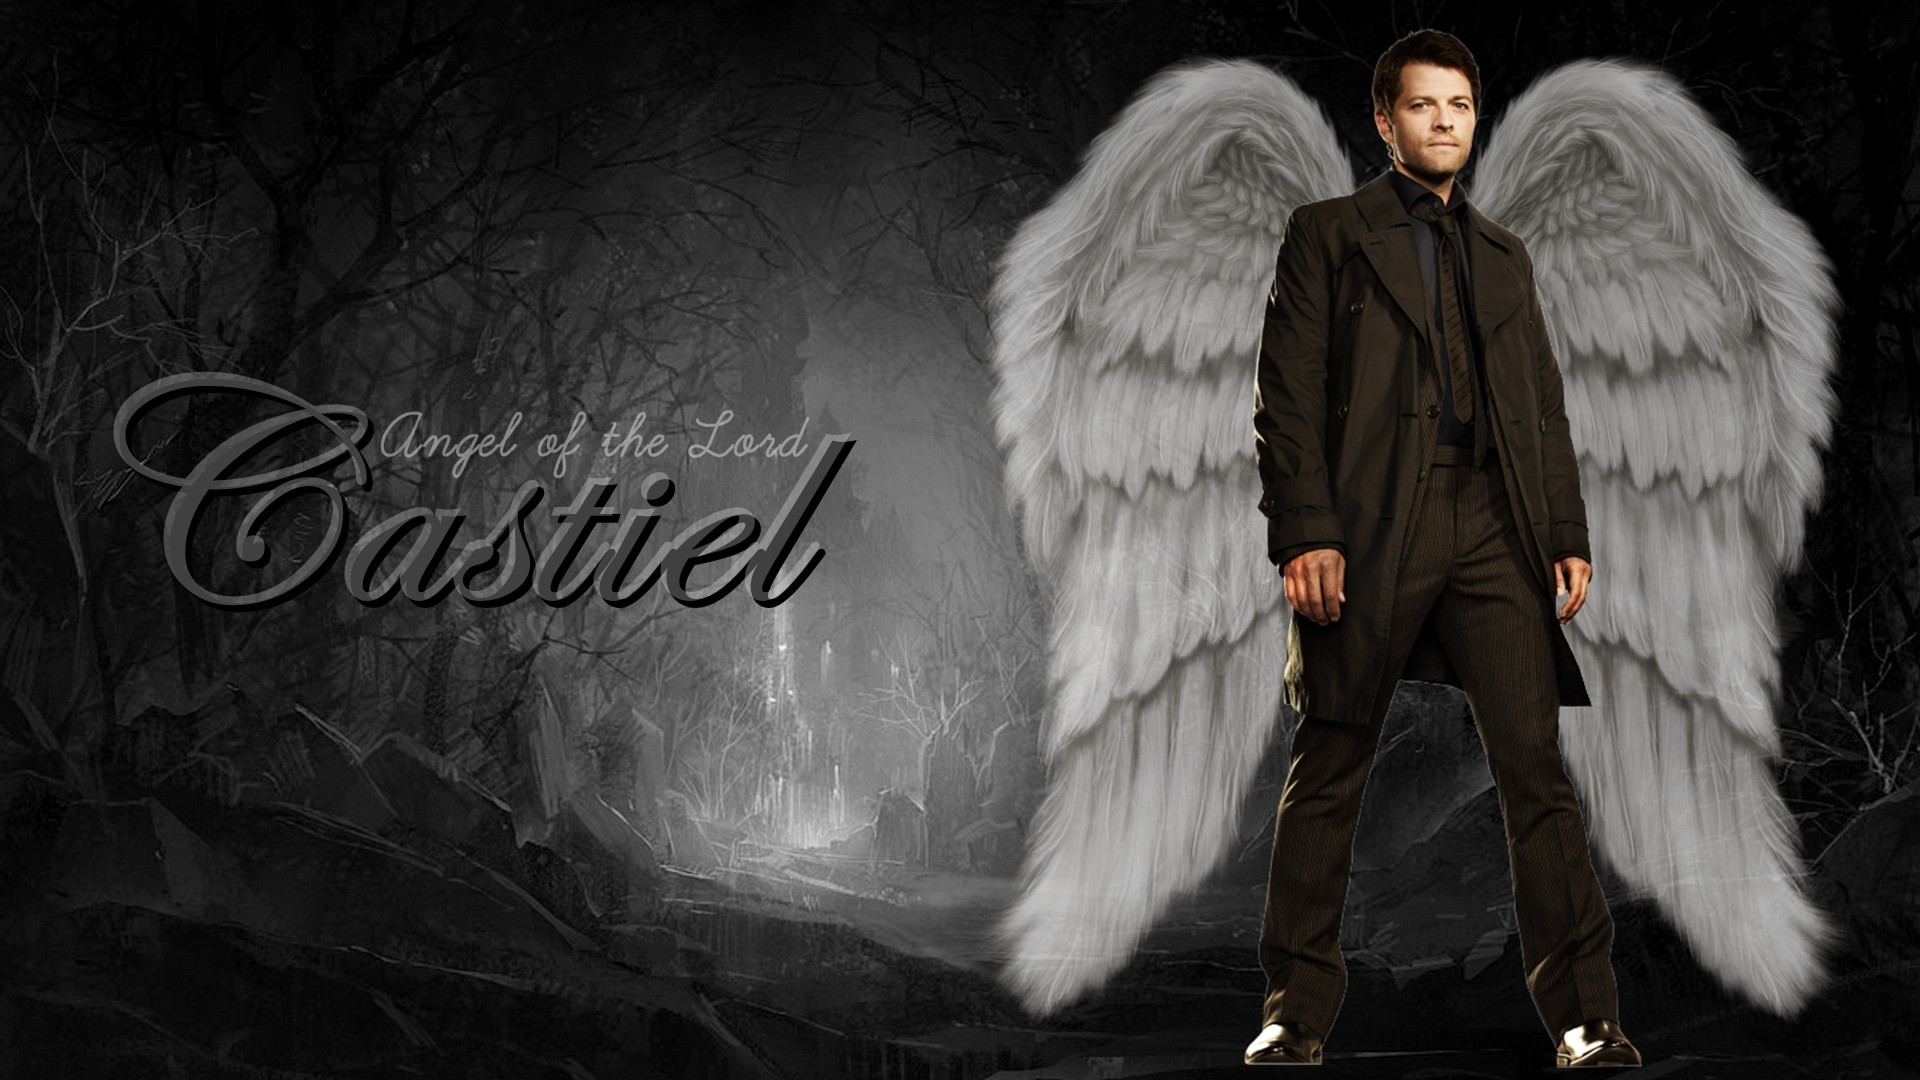 1920x1080 supernatural screen backgrounds free